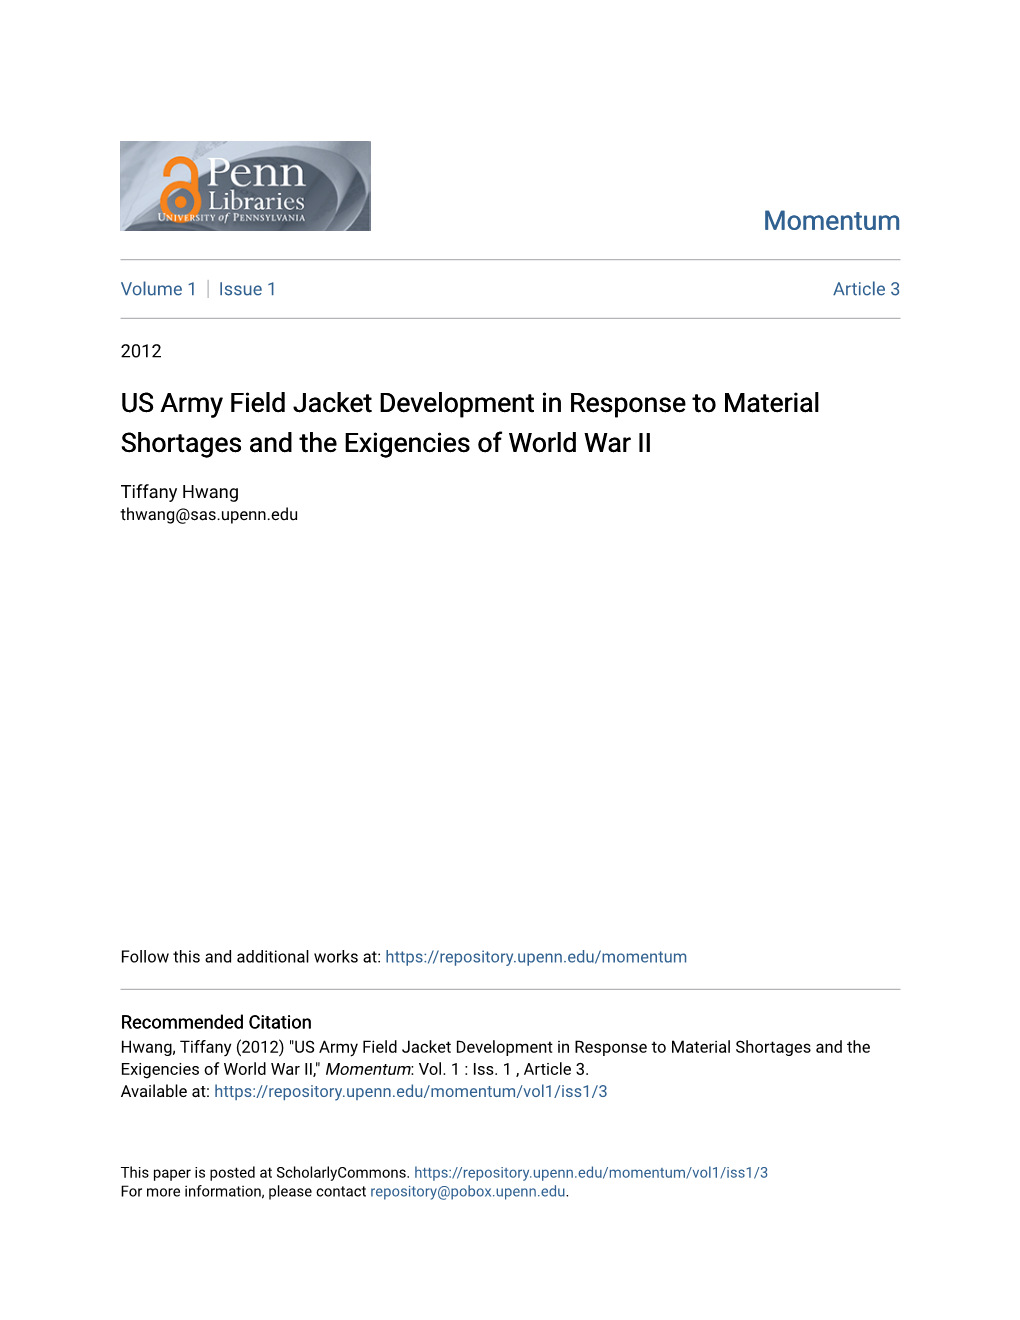 US Army Field Jacket Development in Response to Material Shortages and the Exigencies of World War II